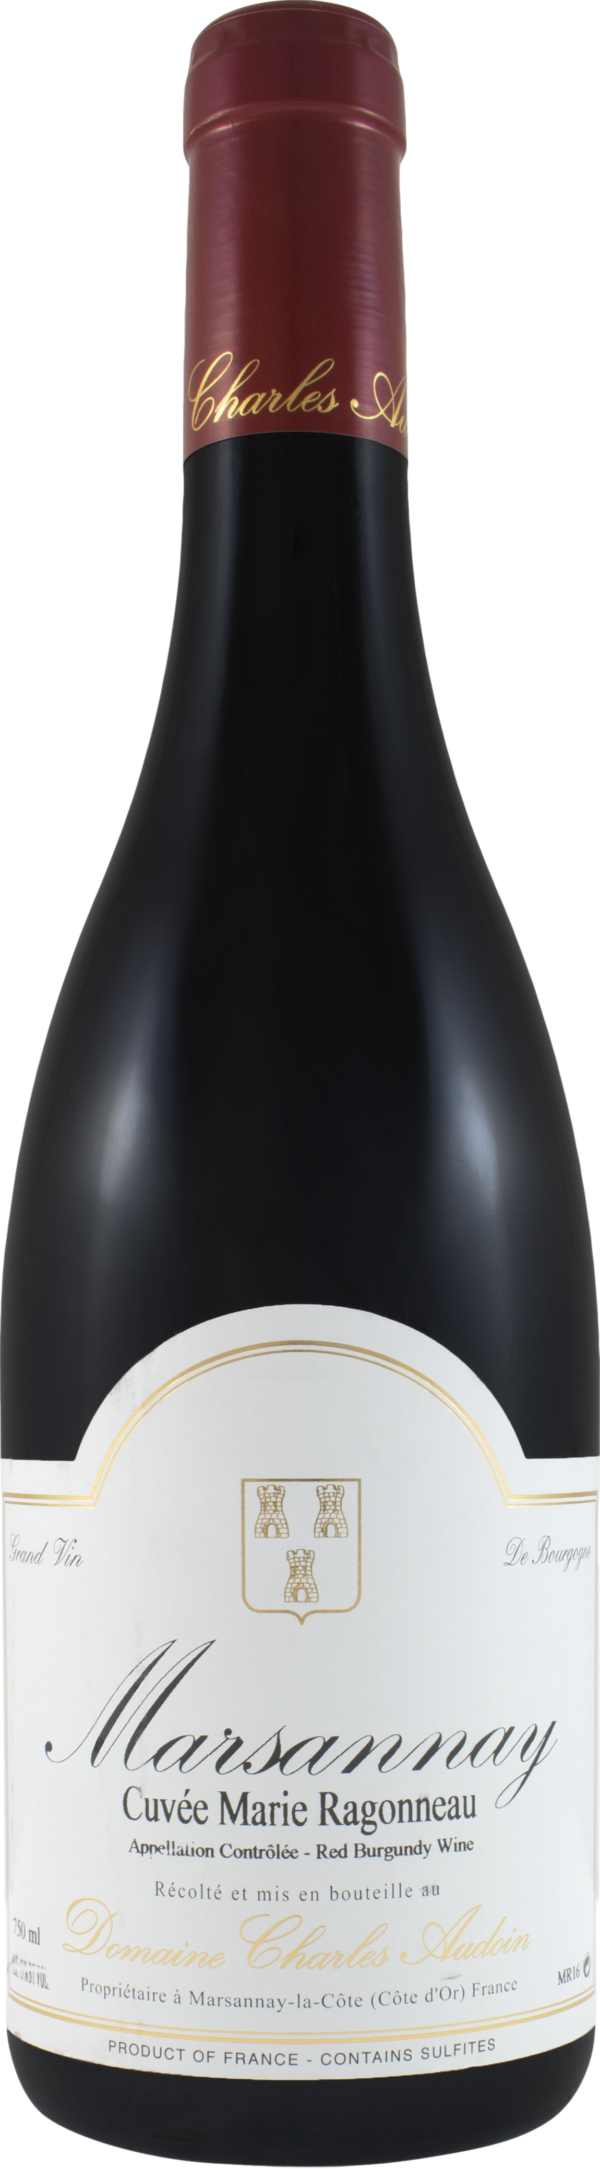 Product image of Domaine Charles Audoin Marsannay Cuvee Marie Ragonneau 2021 from 8wines